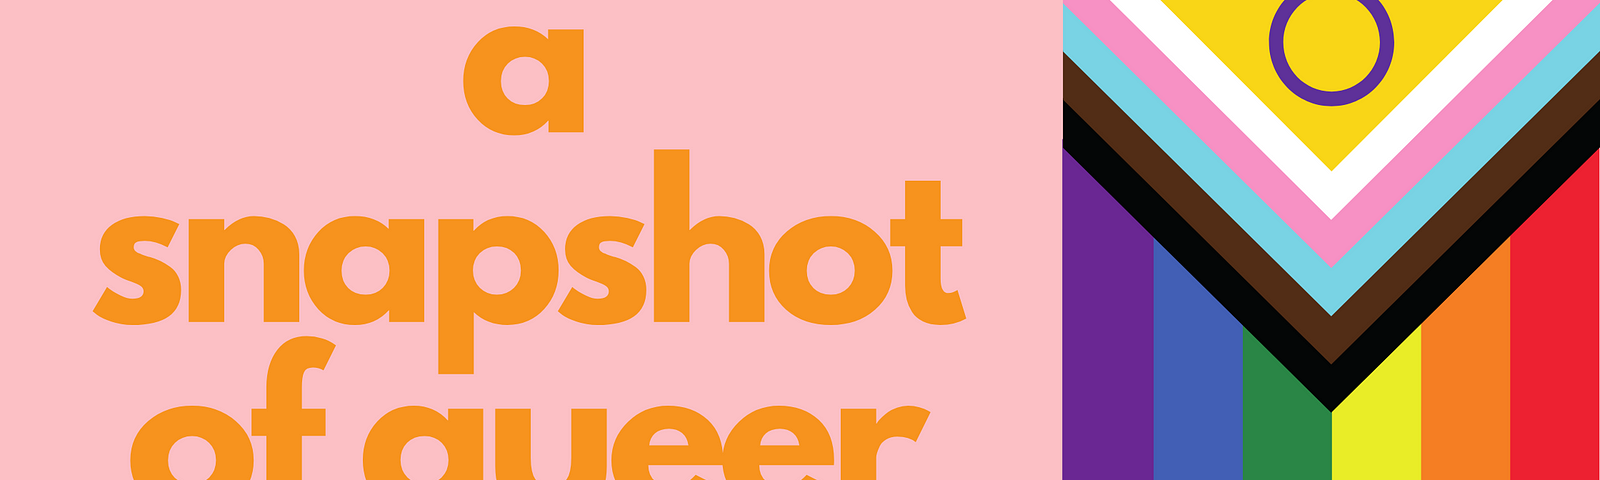 text on light pink background next to an image of the pride progress flag reads “a snapshot of queer history”